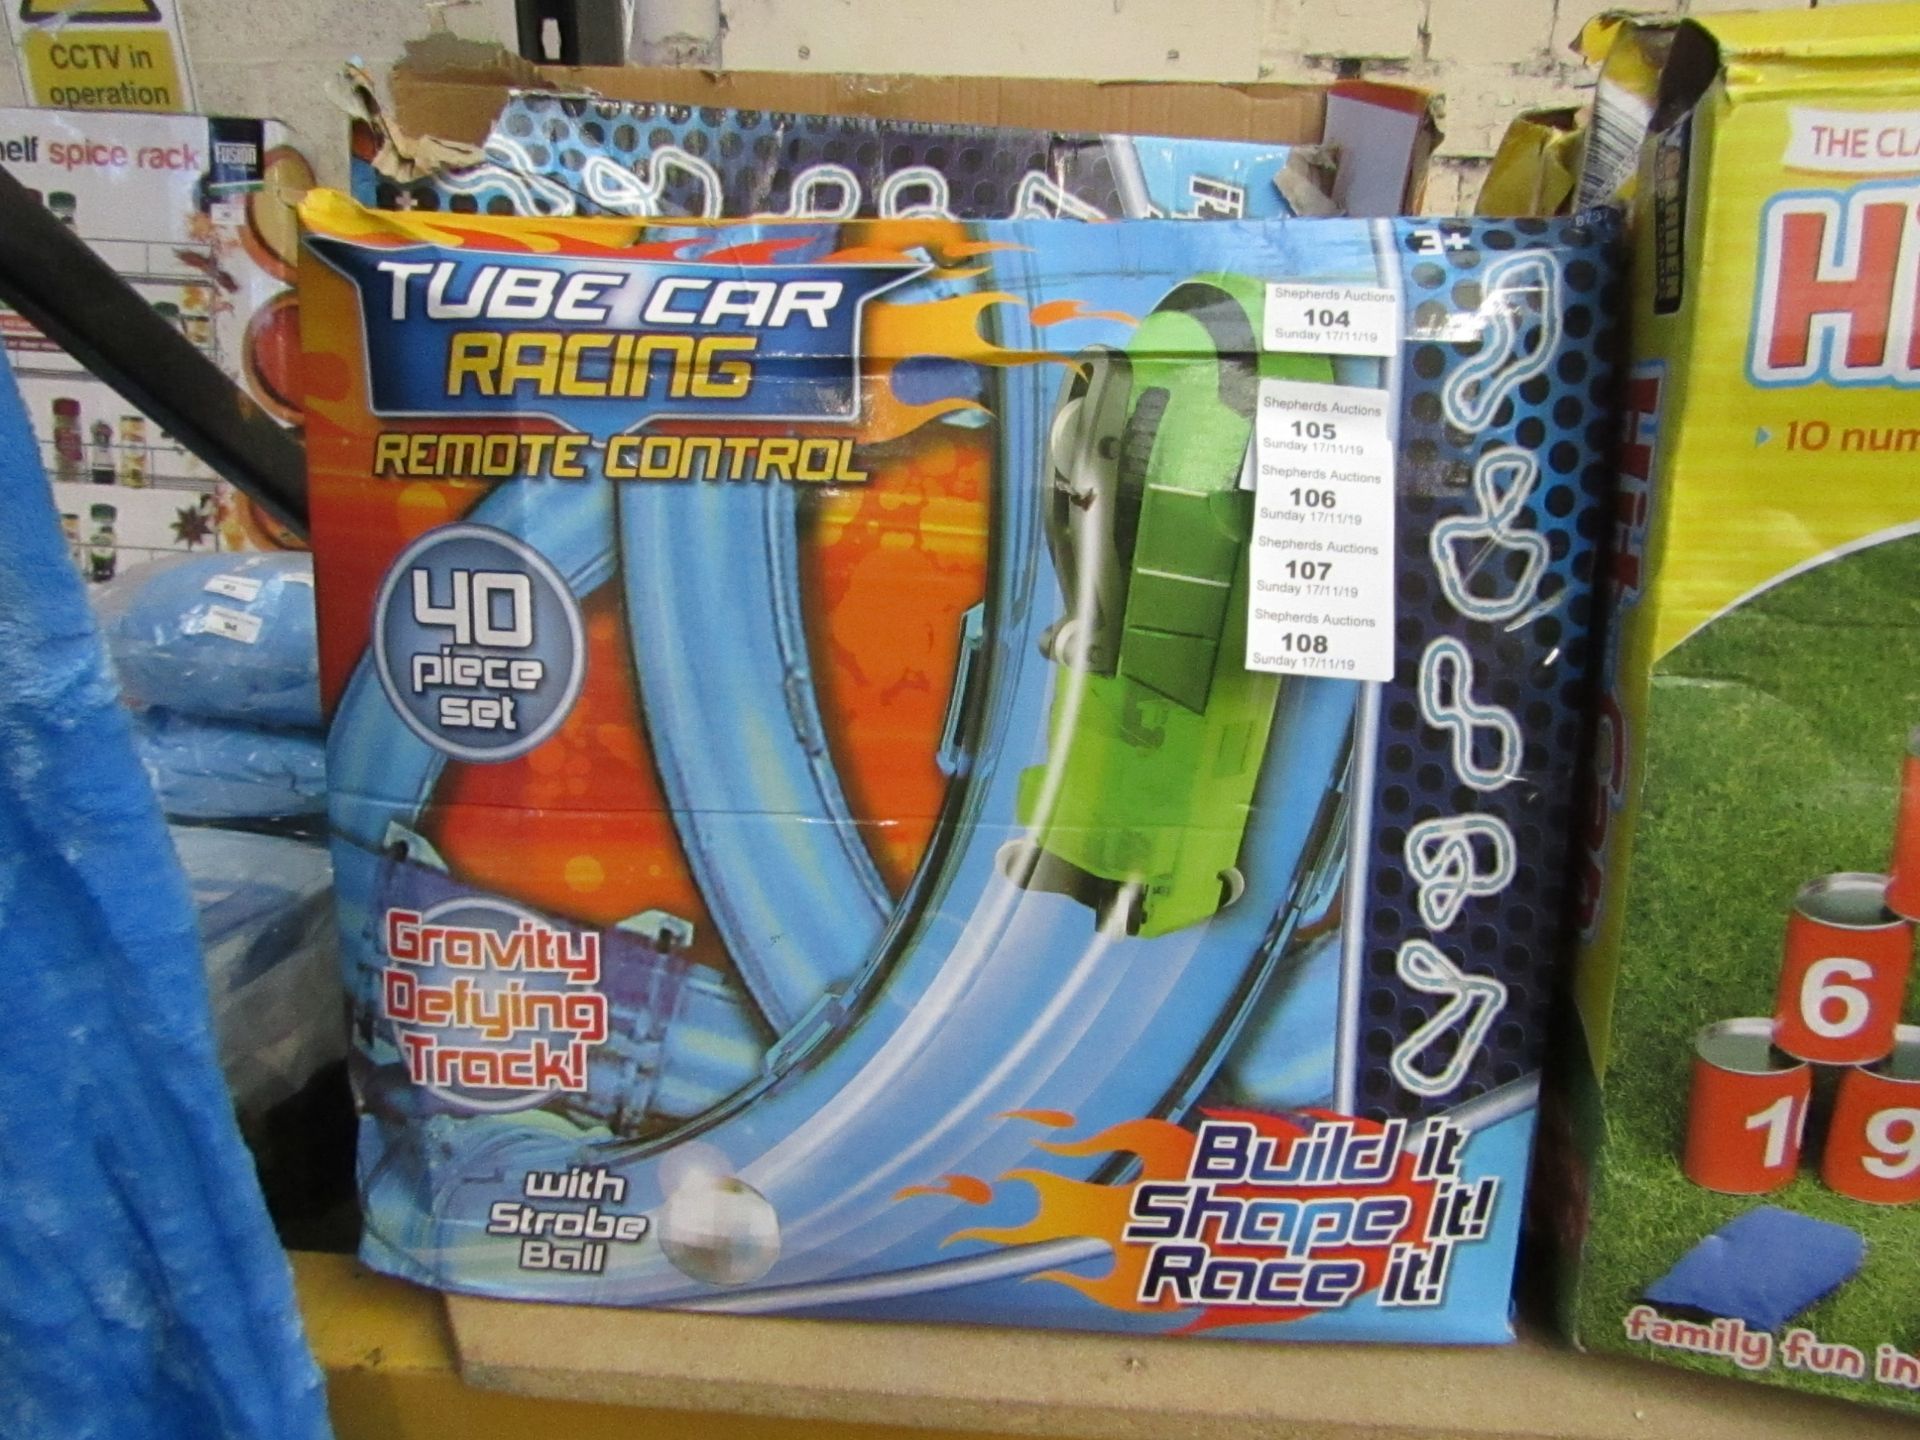 Tube car Racing remote control track with strobe ball.Boxed but unchecked